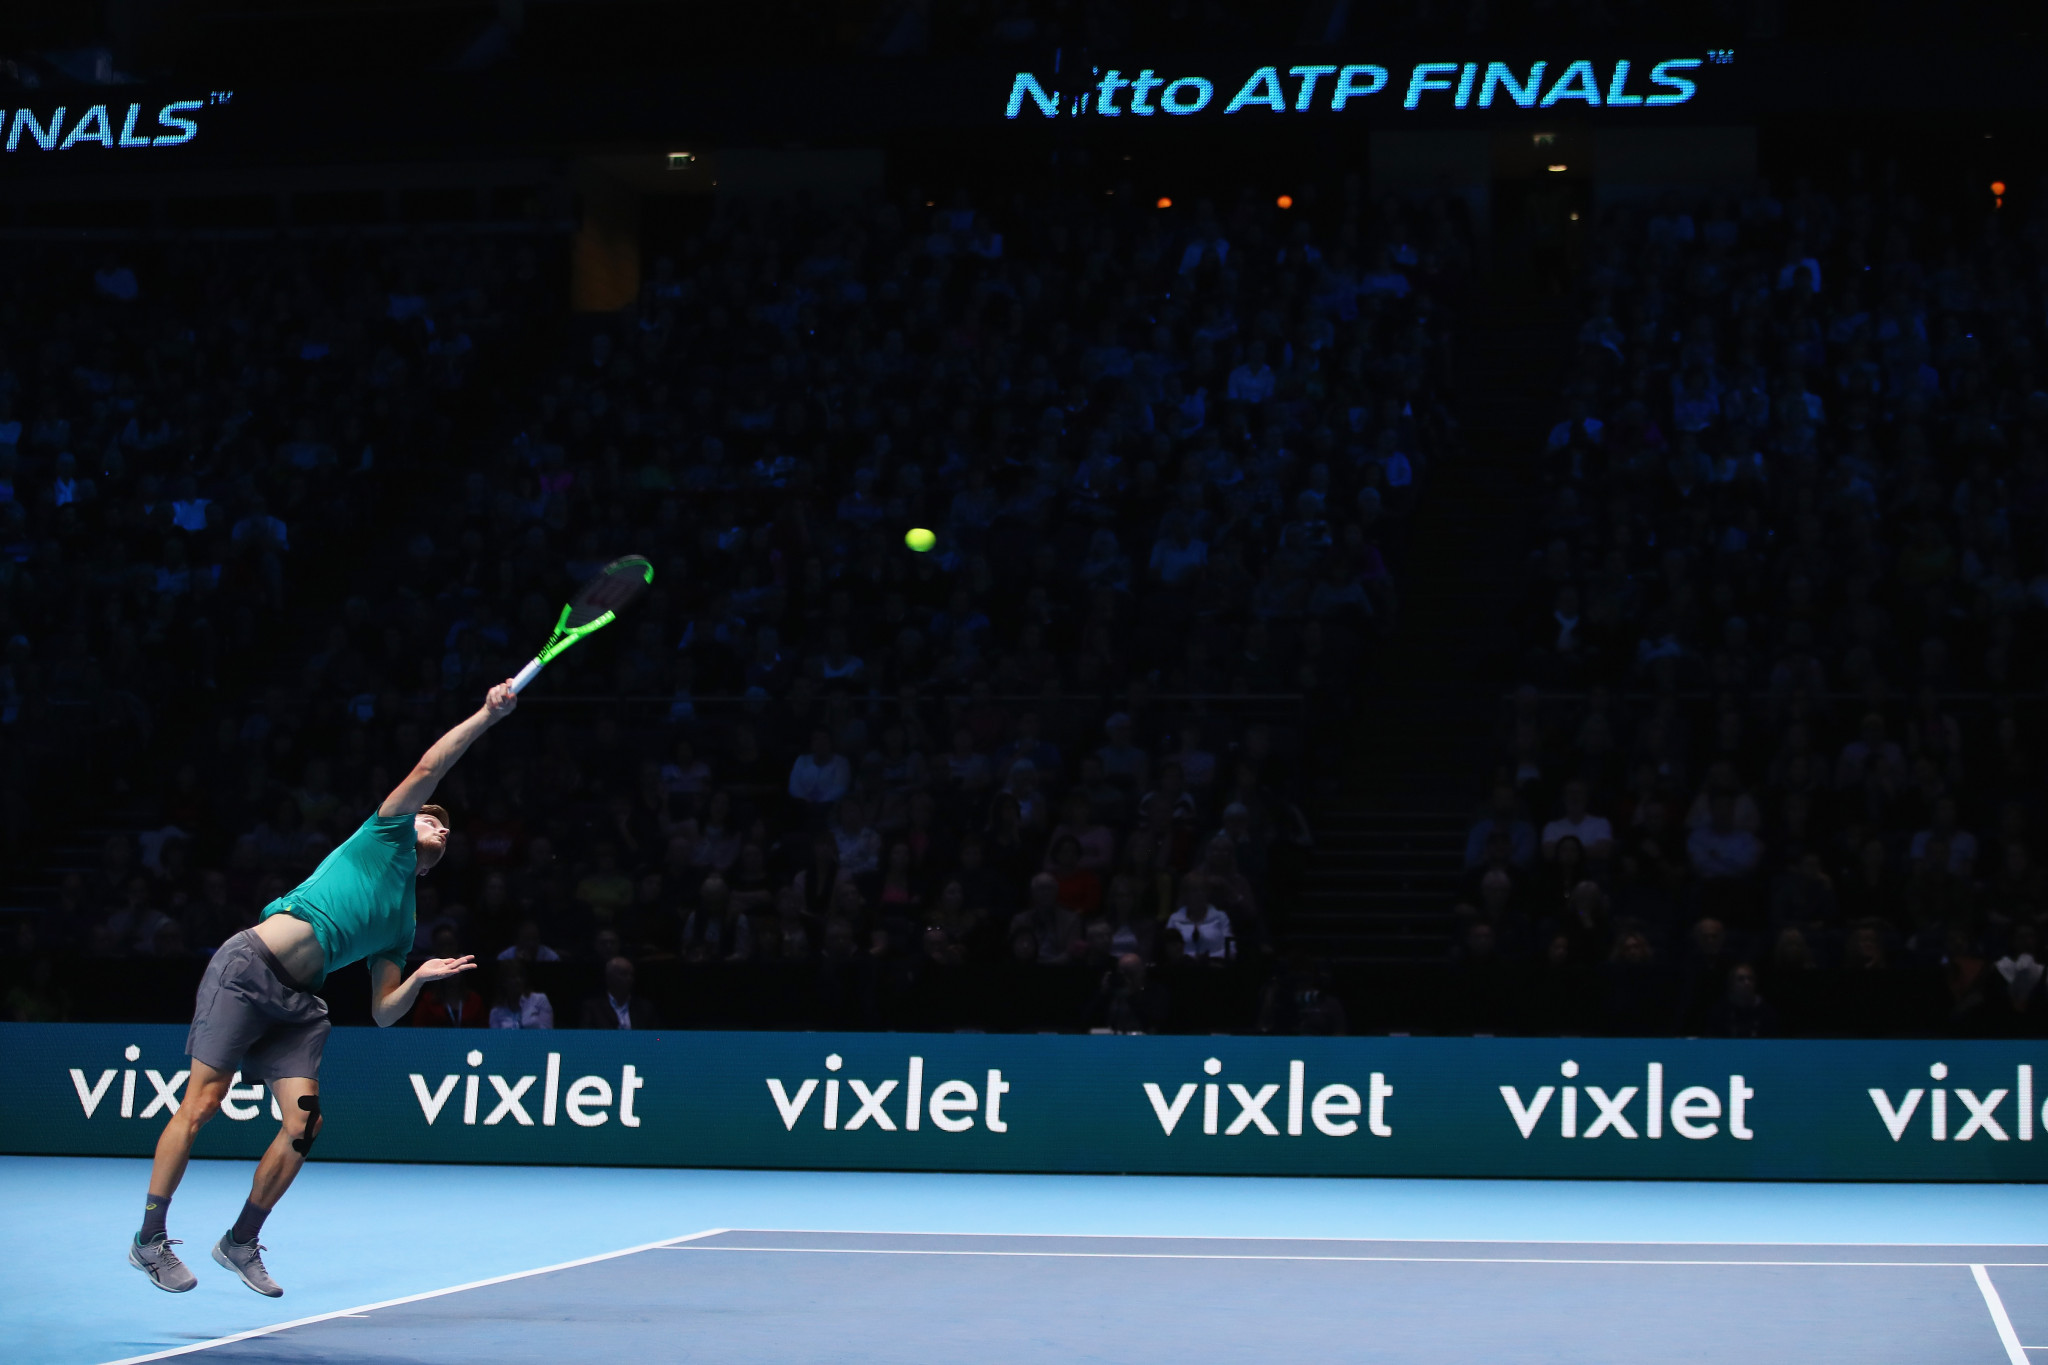 Goffin powers into last four at ATP World Tour Finals with straight sets win over Thiem